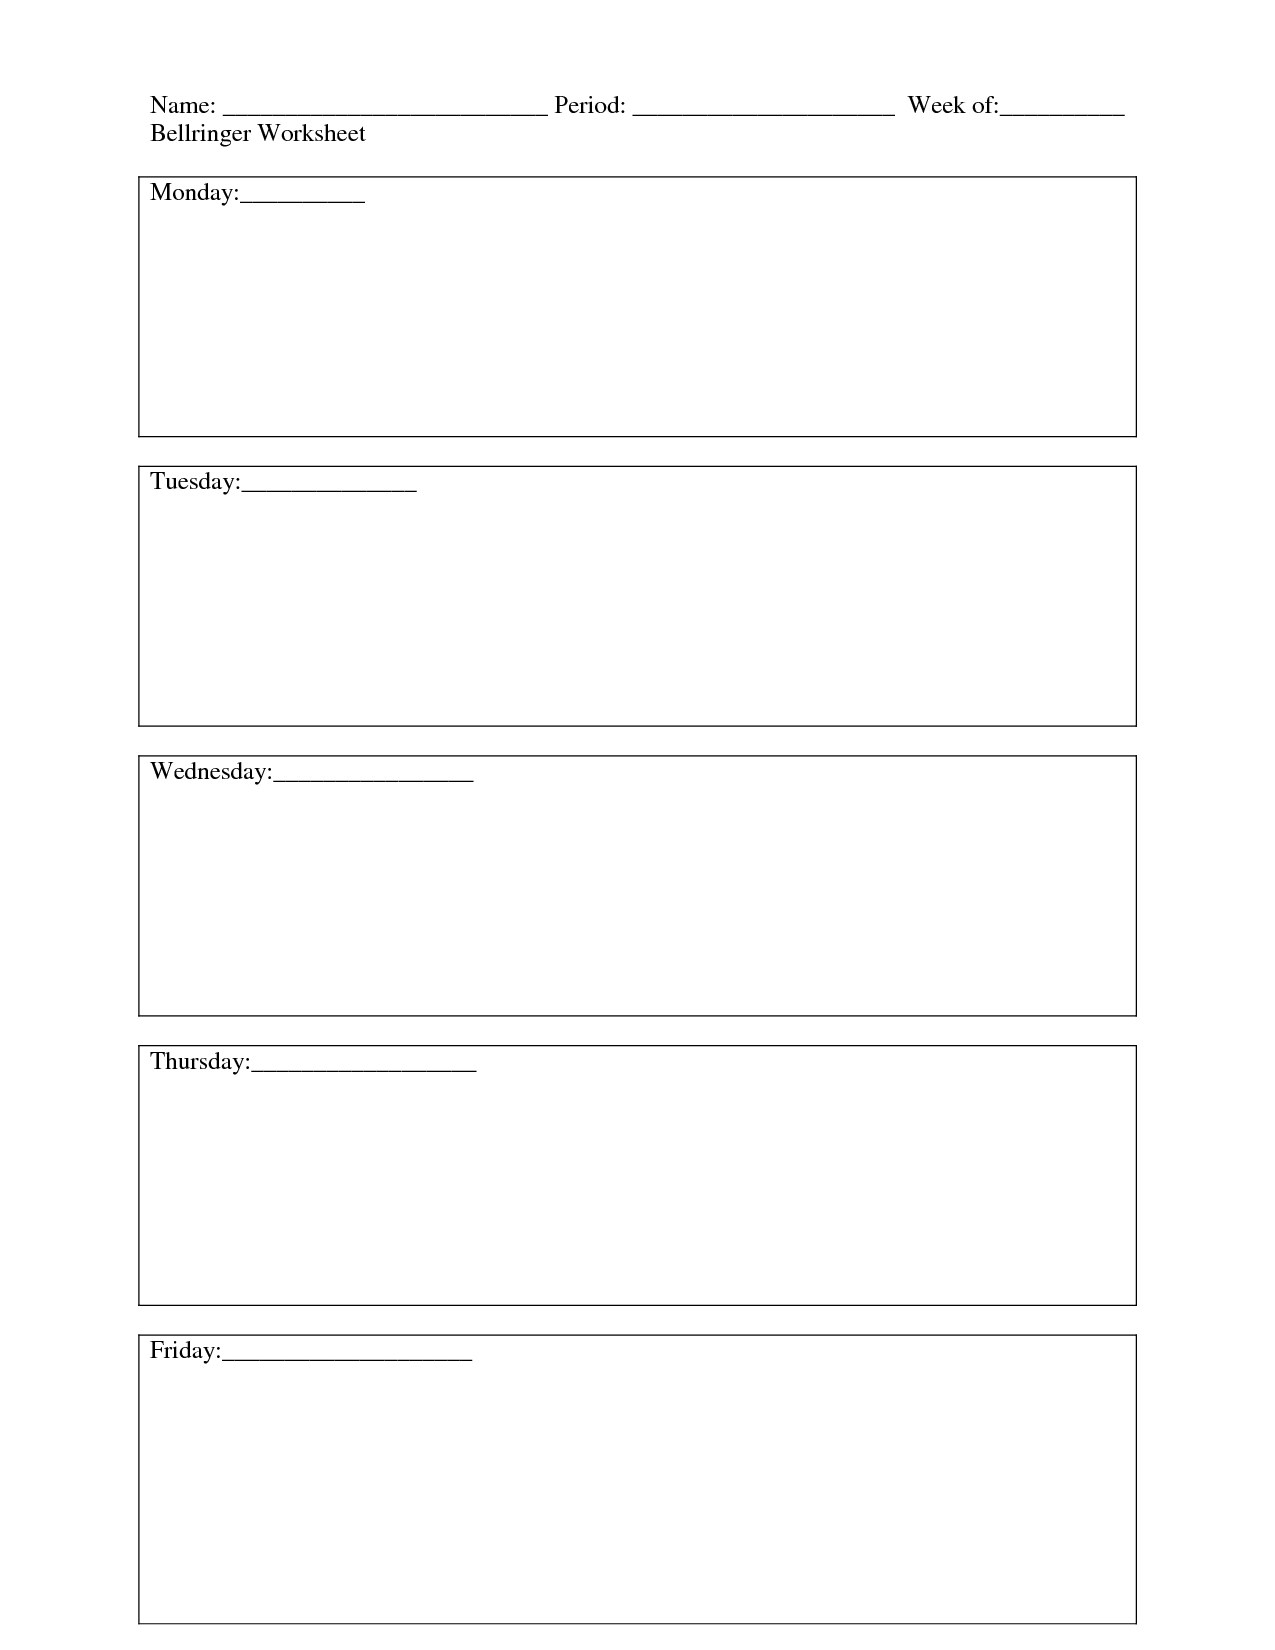 Weekly Bell Ringer Template